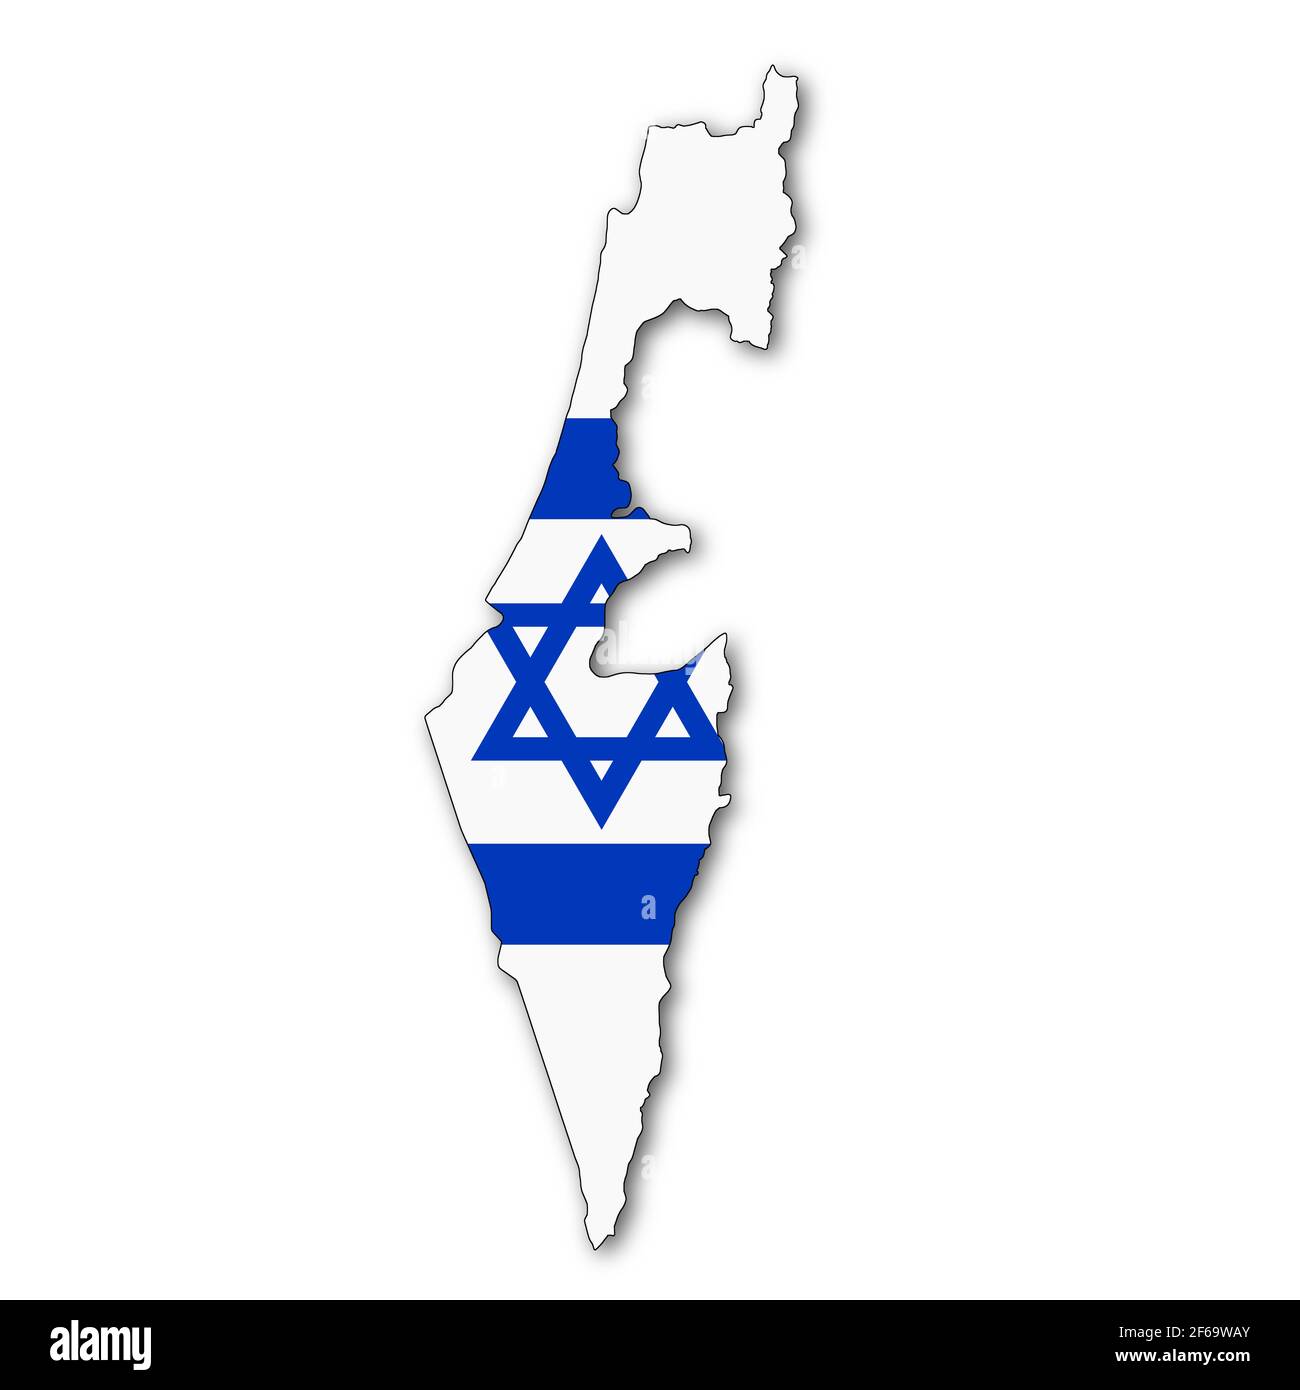 Israel map on white background with clipping path to remove shadow 3d illustration Stock Photo